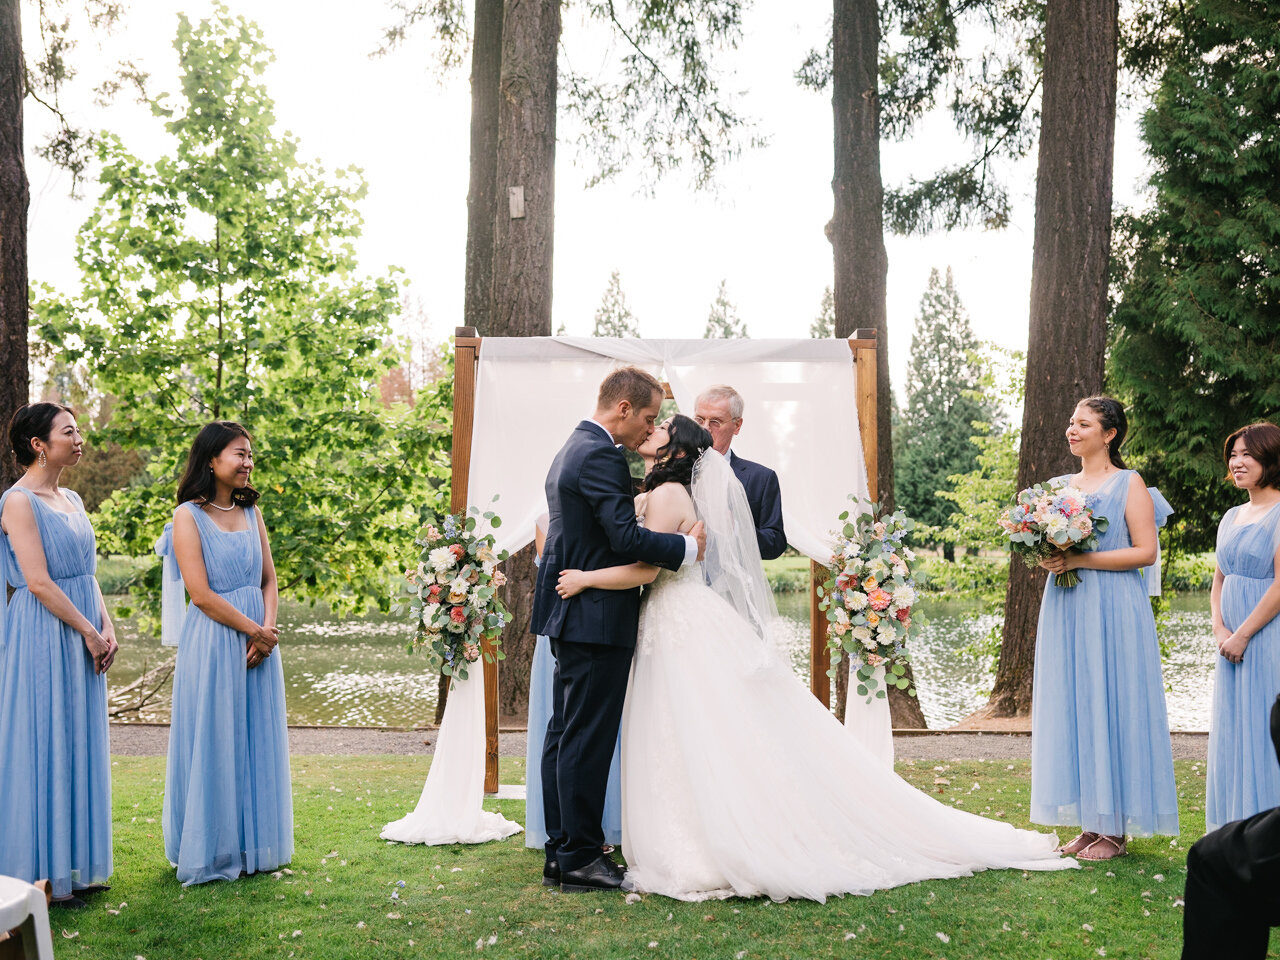  Bride and groom kiss in front of wedding arch before bridesmaids with blue dresses and tall fir trees 